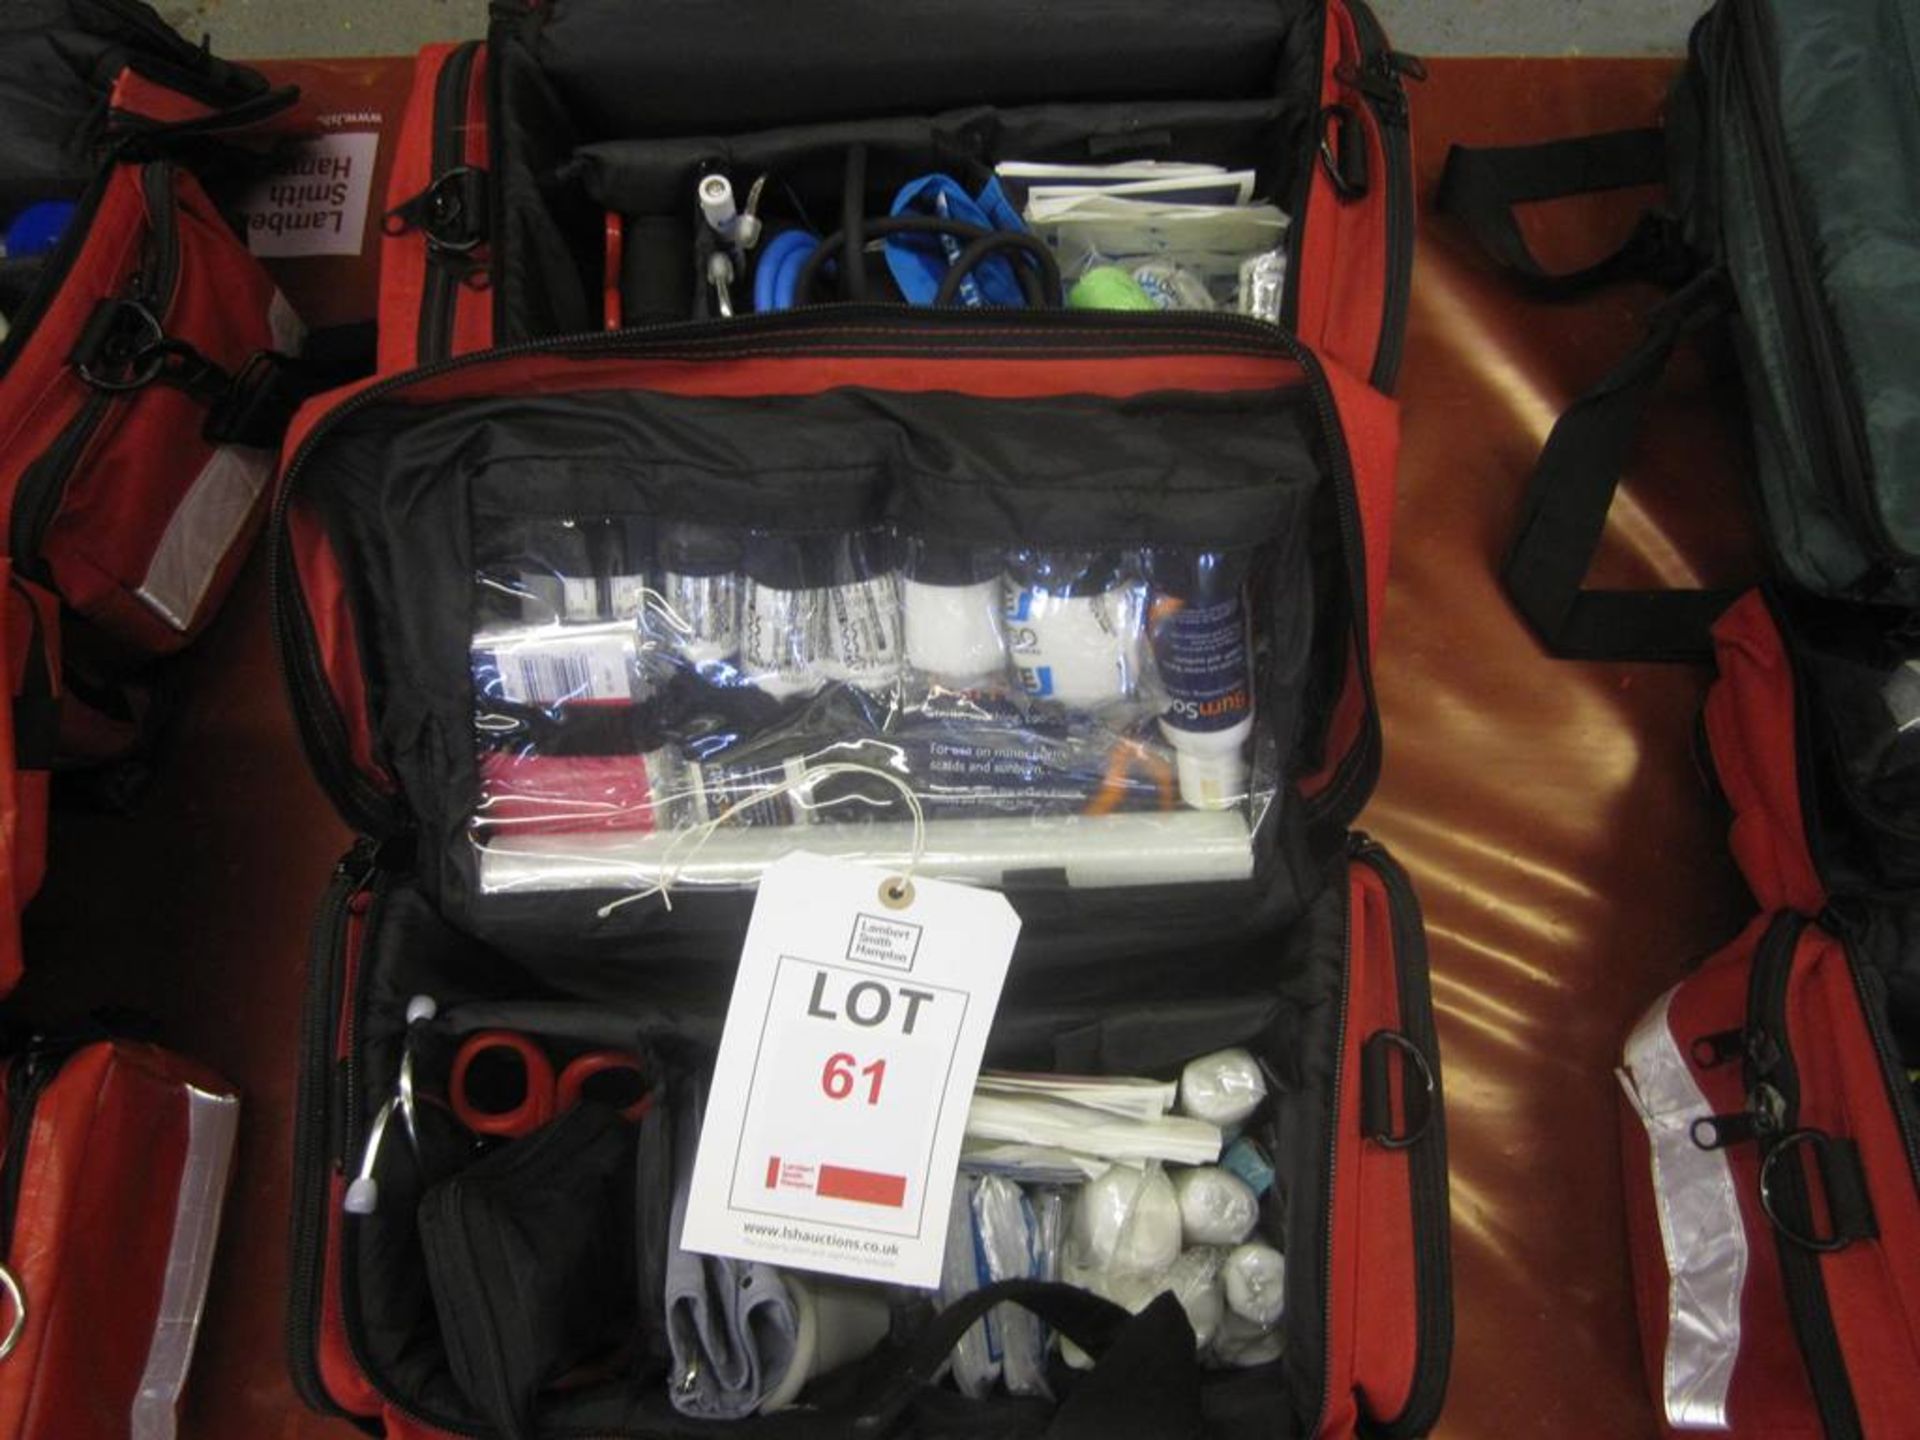 Two paramedic First Response carry Go bags and contents